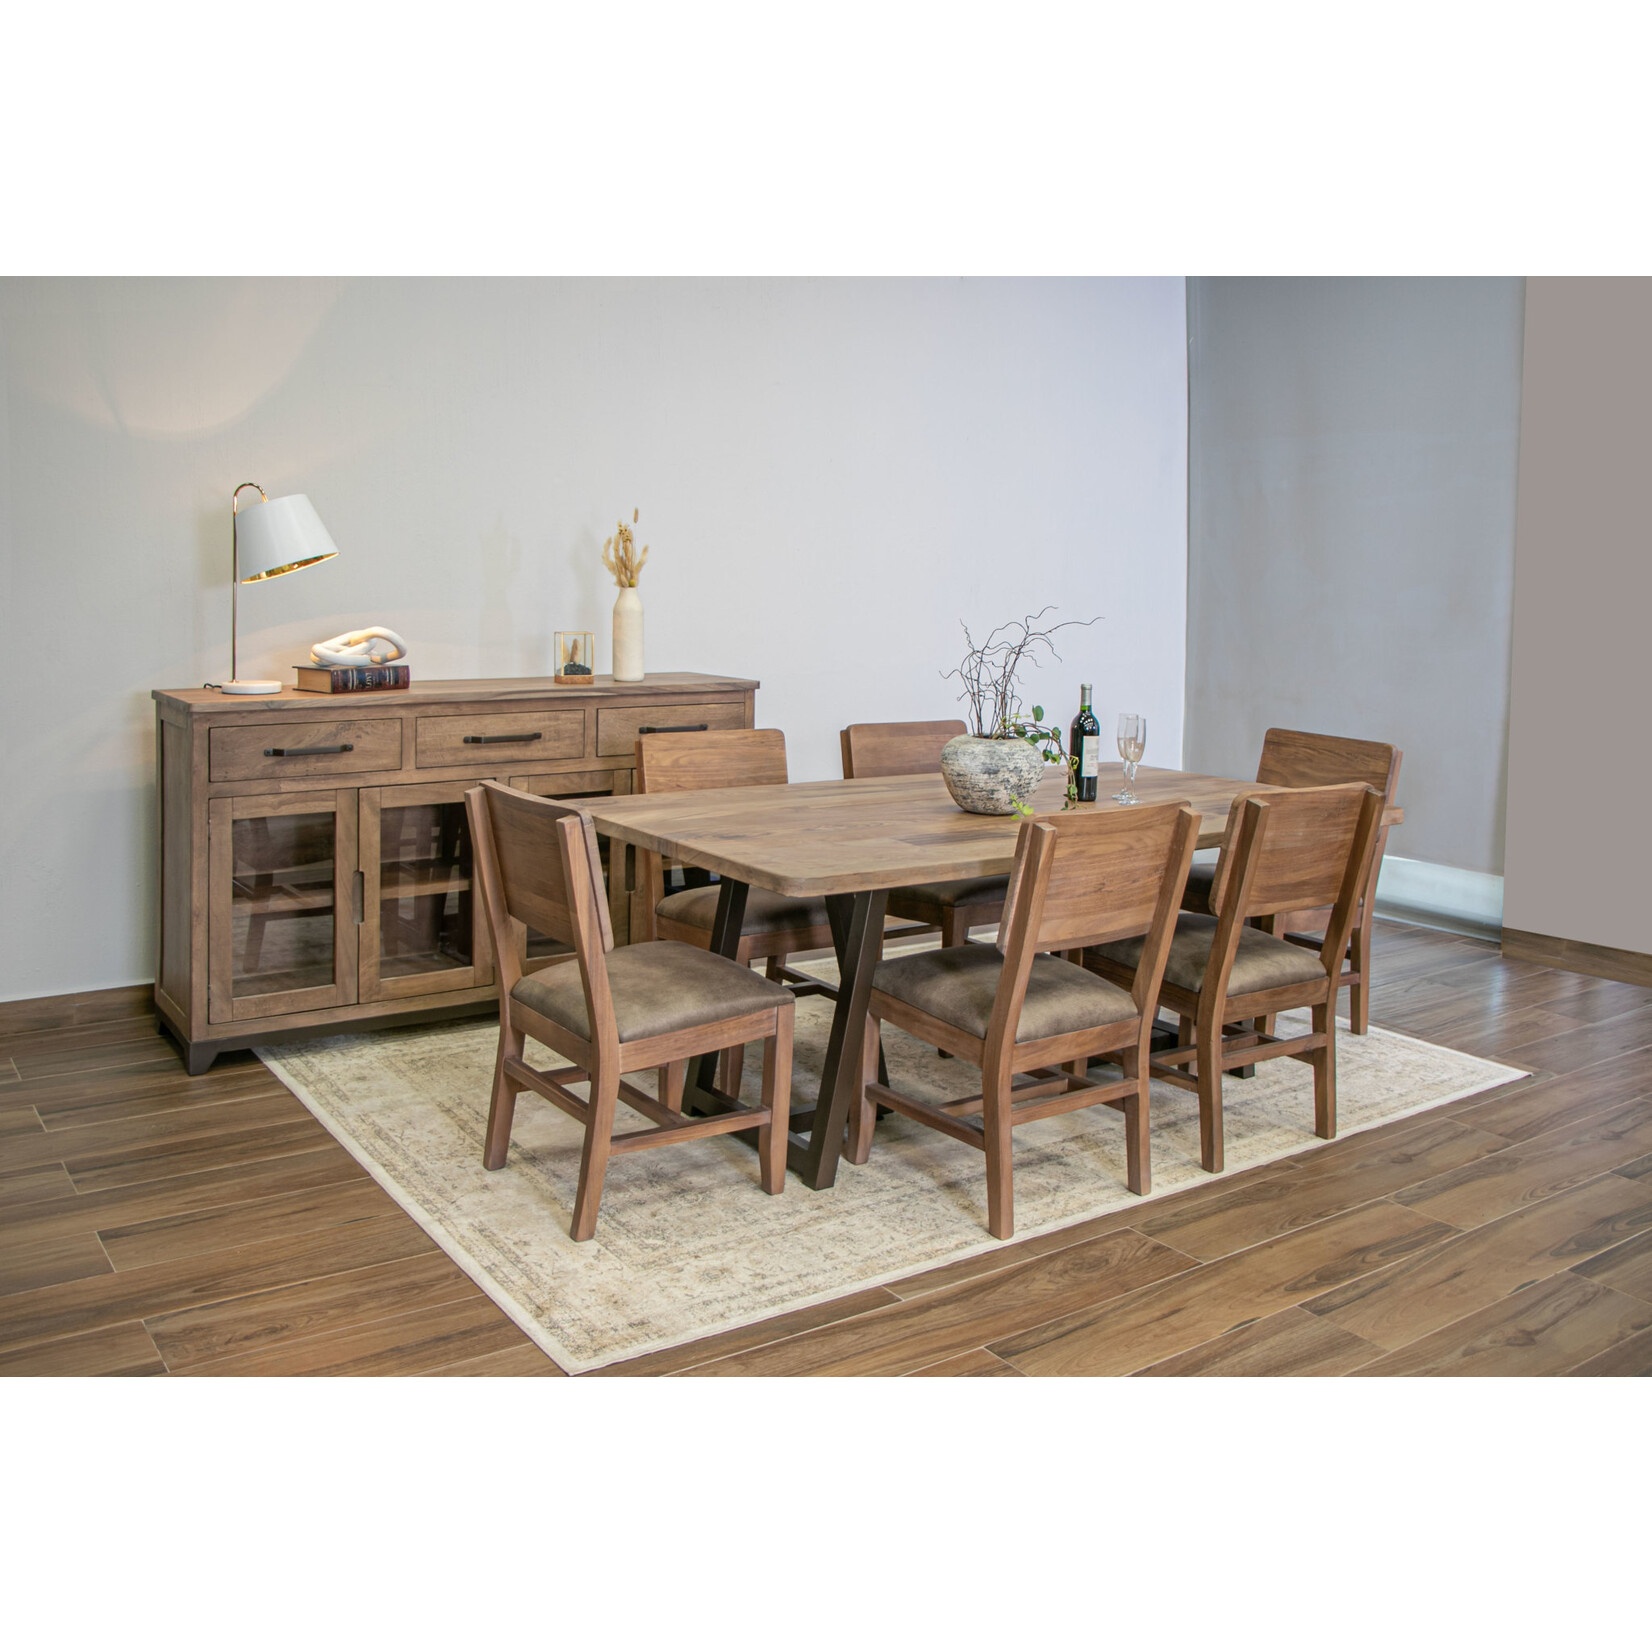 Natural Parota Dining Table and 6 Chairs